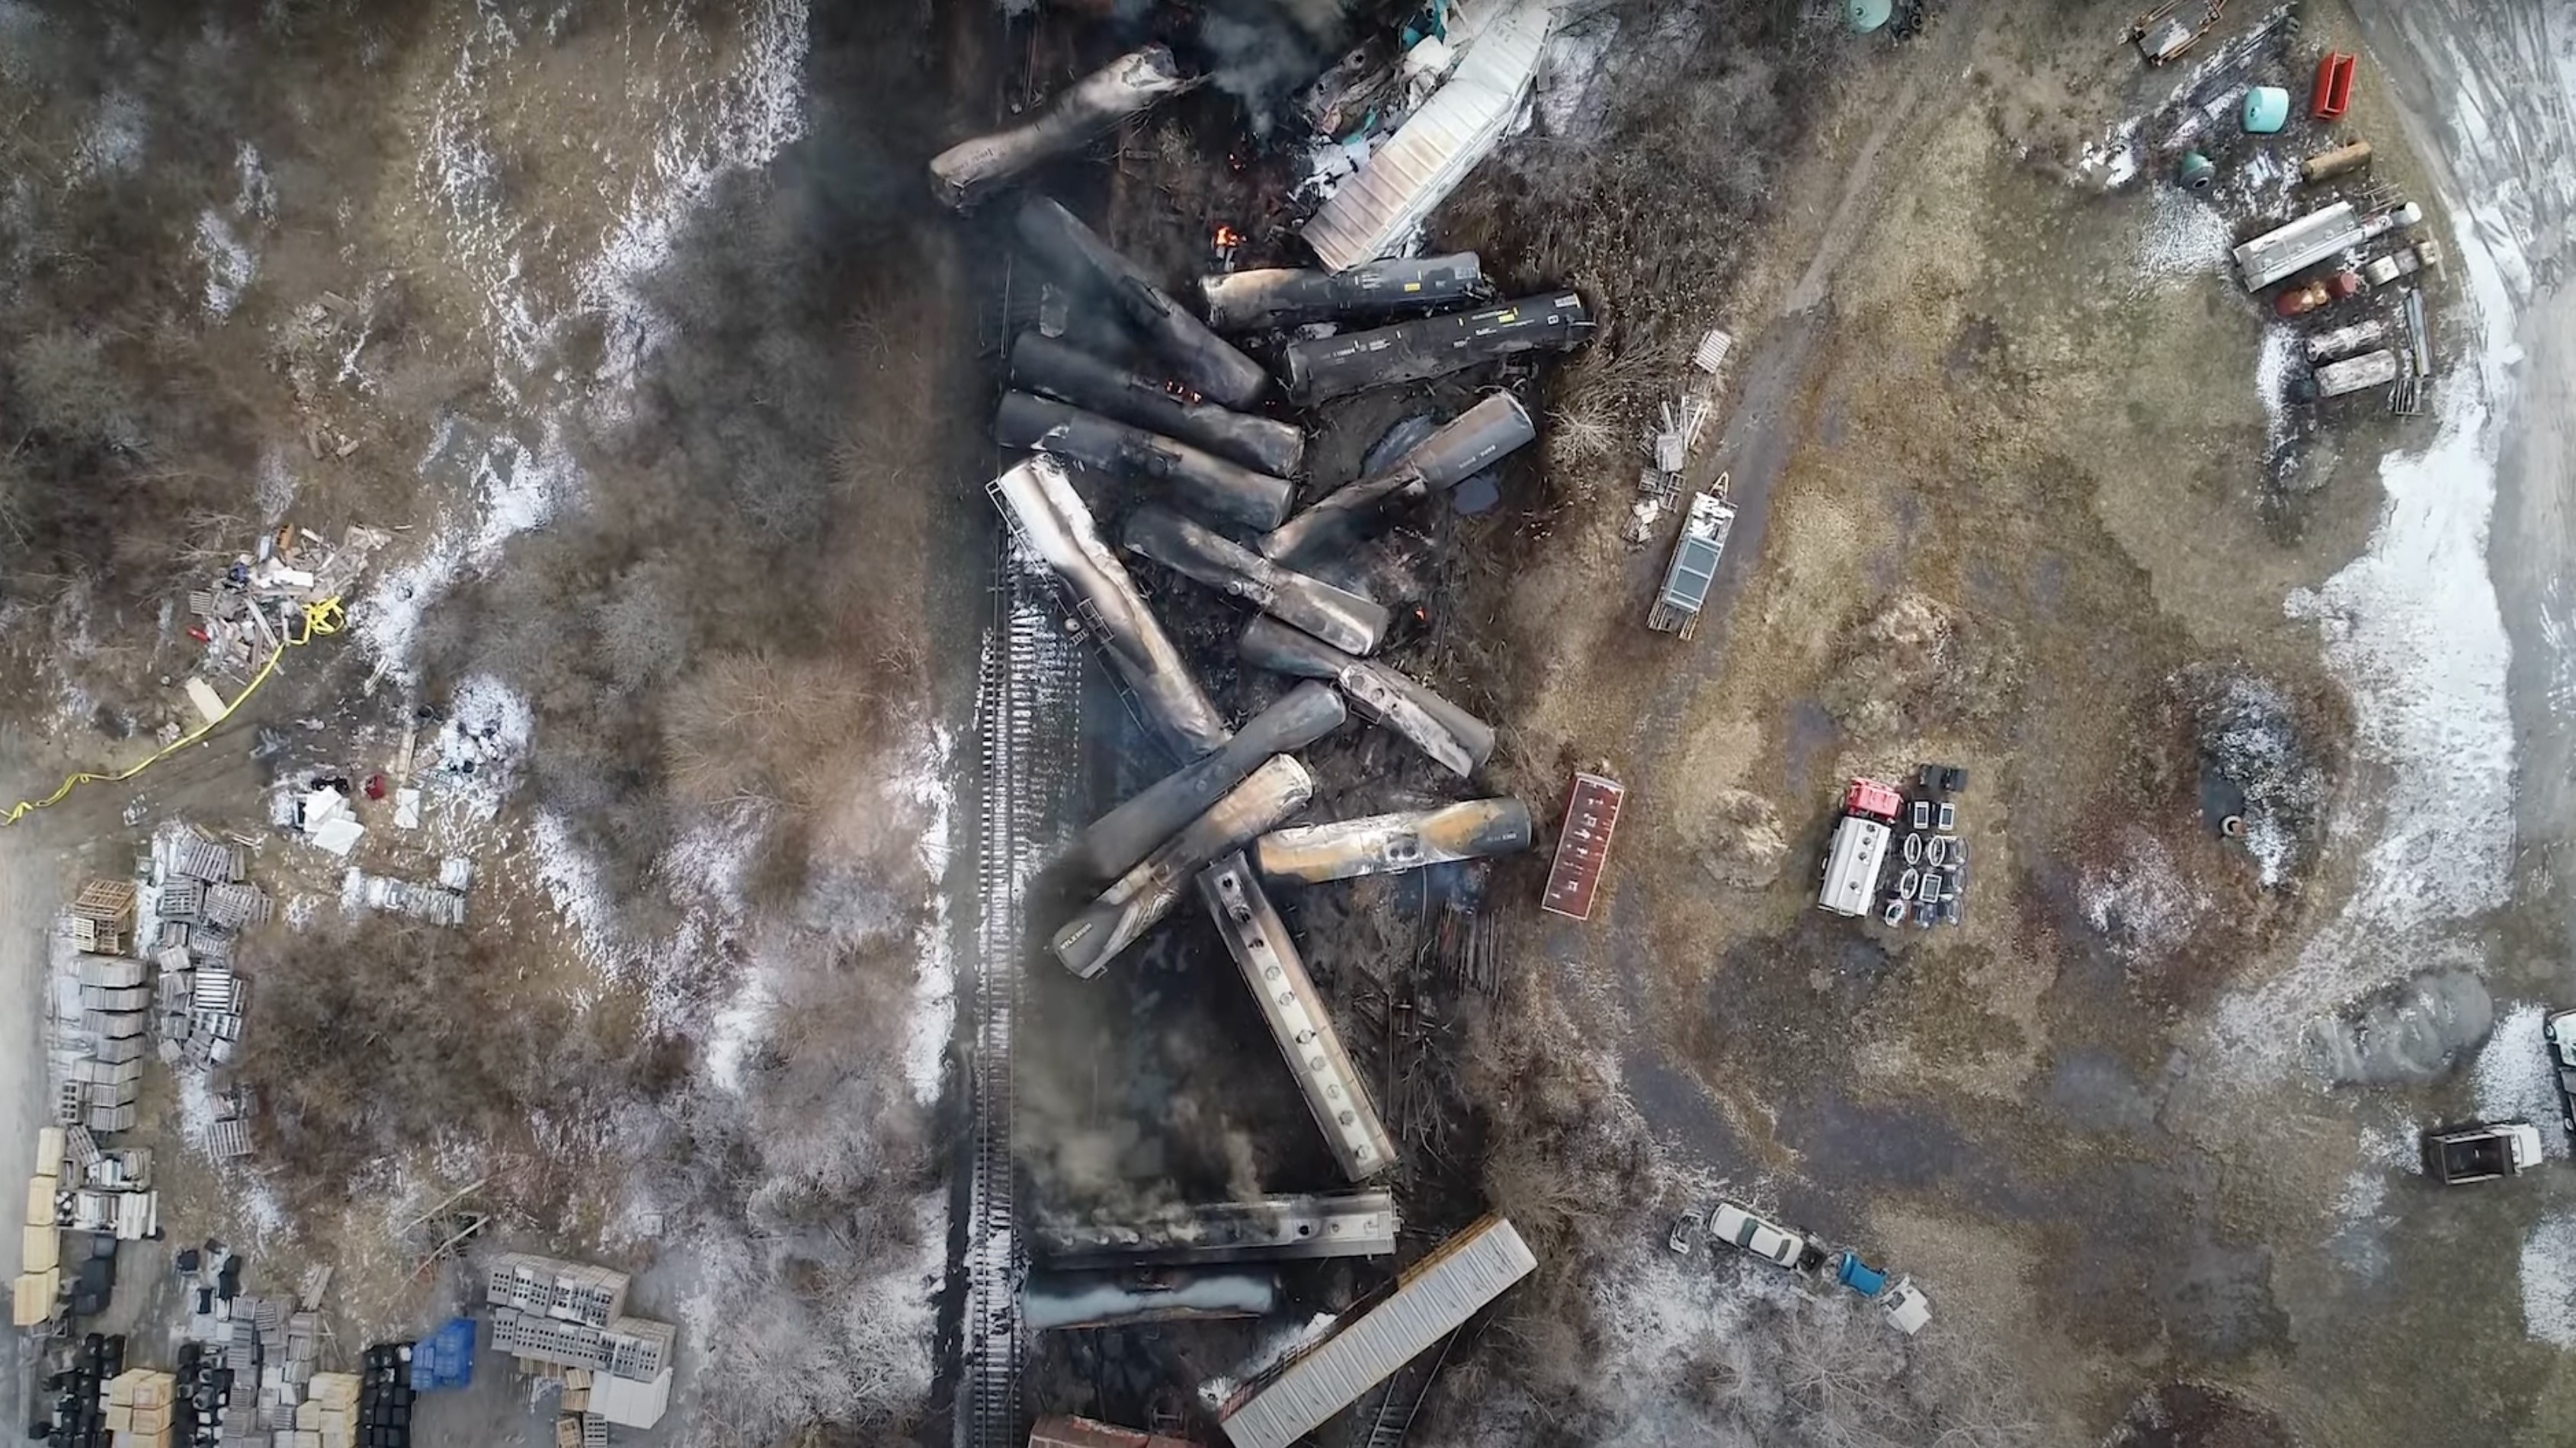 video screenshot released by the U.S. National Transportation Safety Board (NTSB) shows the site of a derailed freight train in East Palestine, Ohio